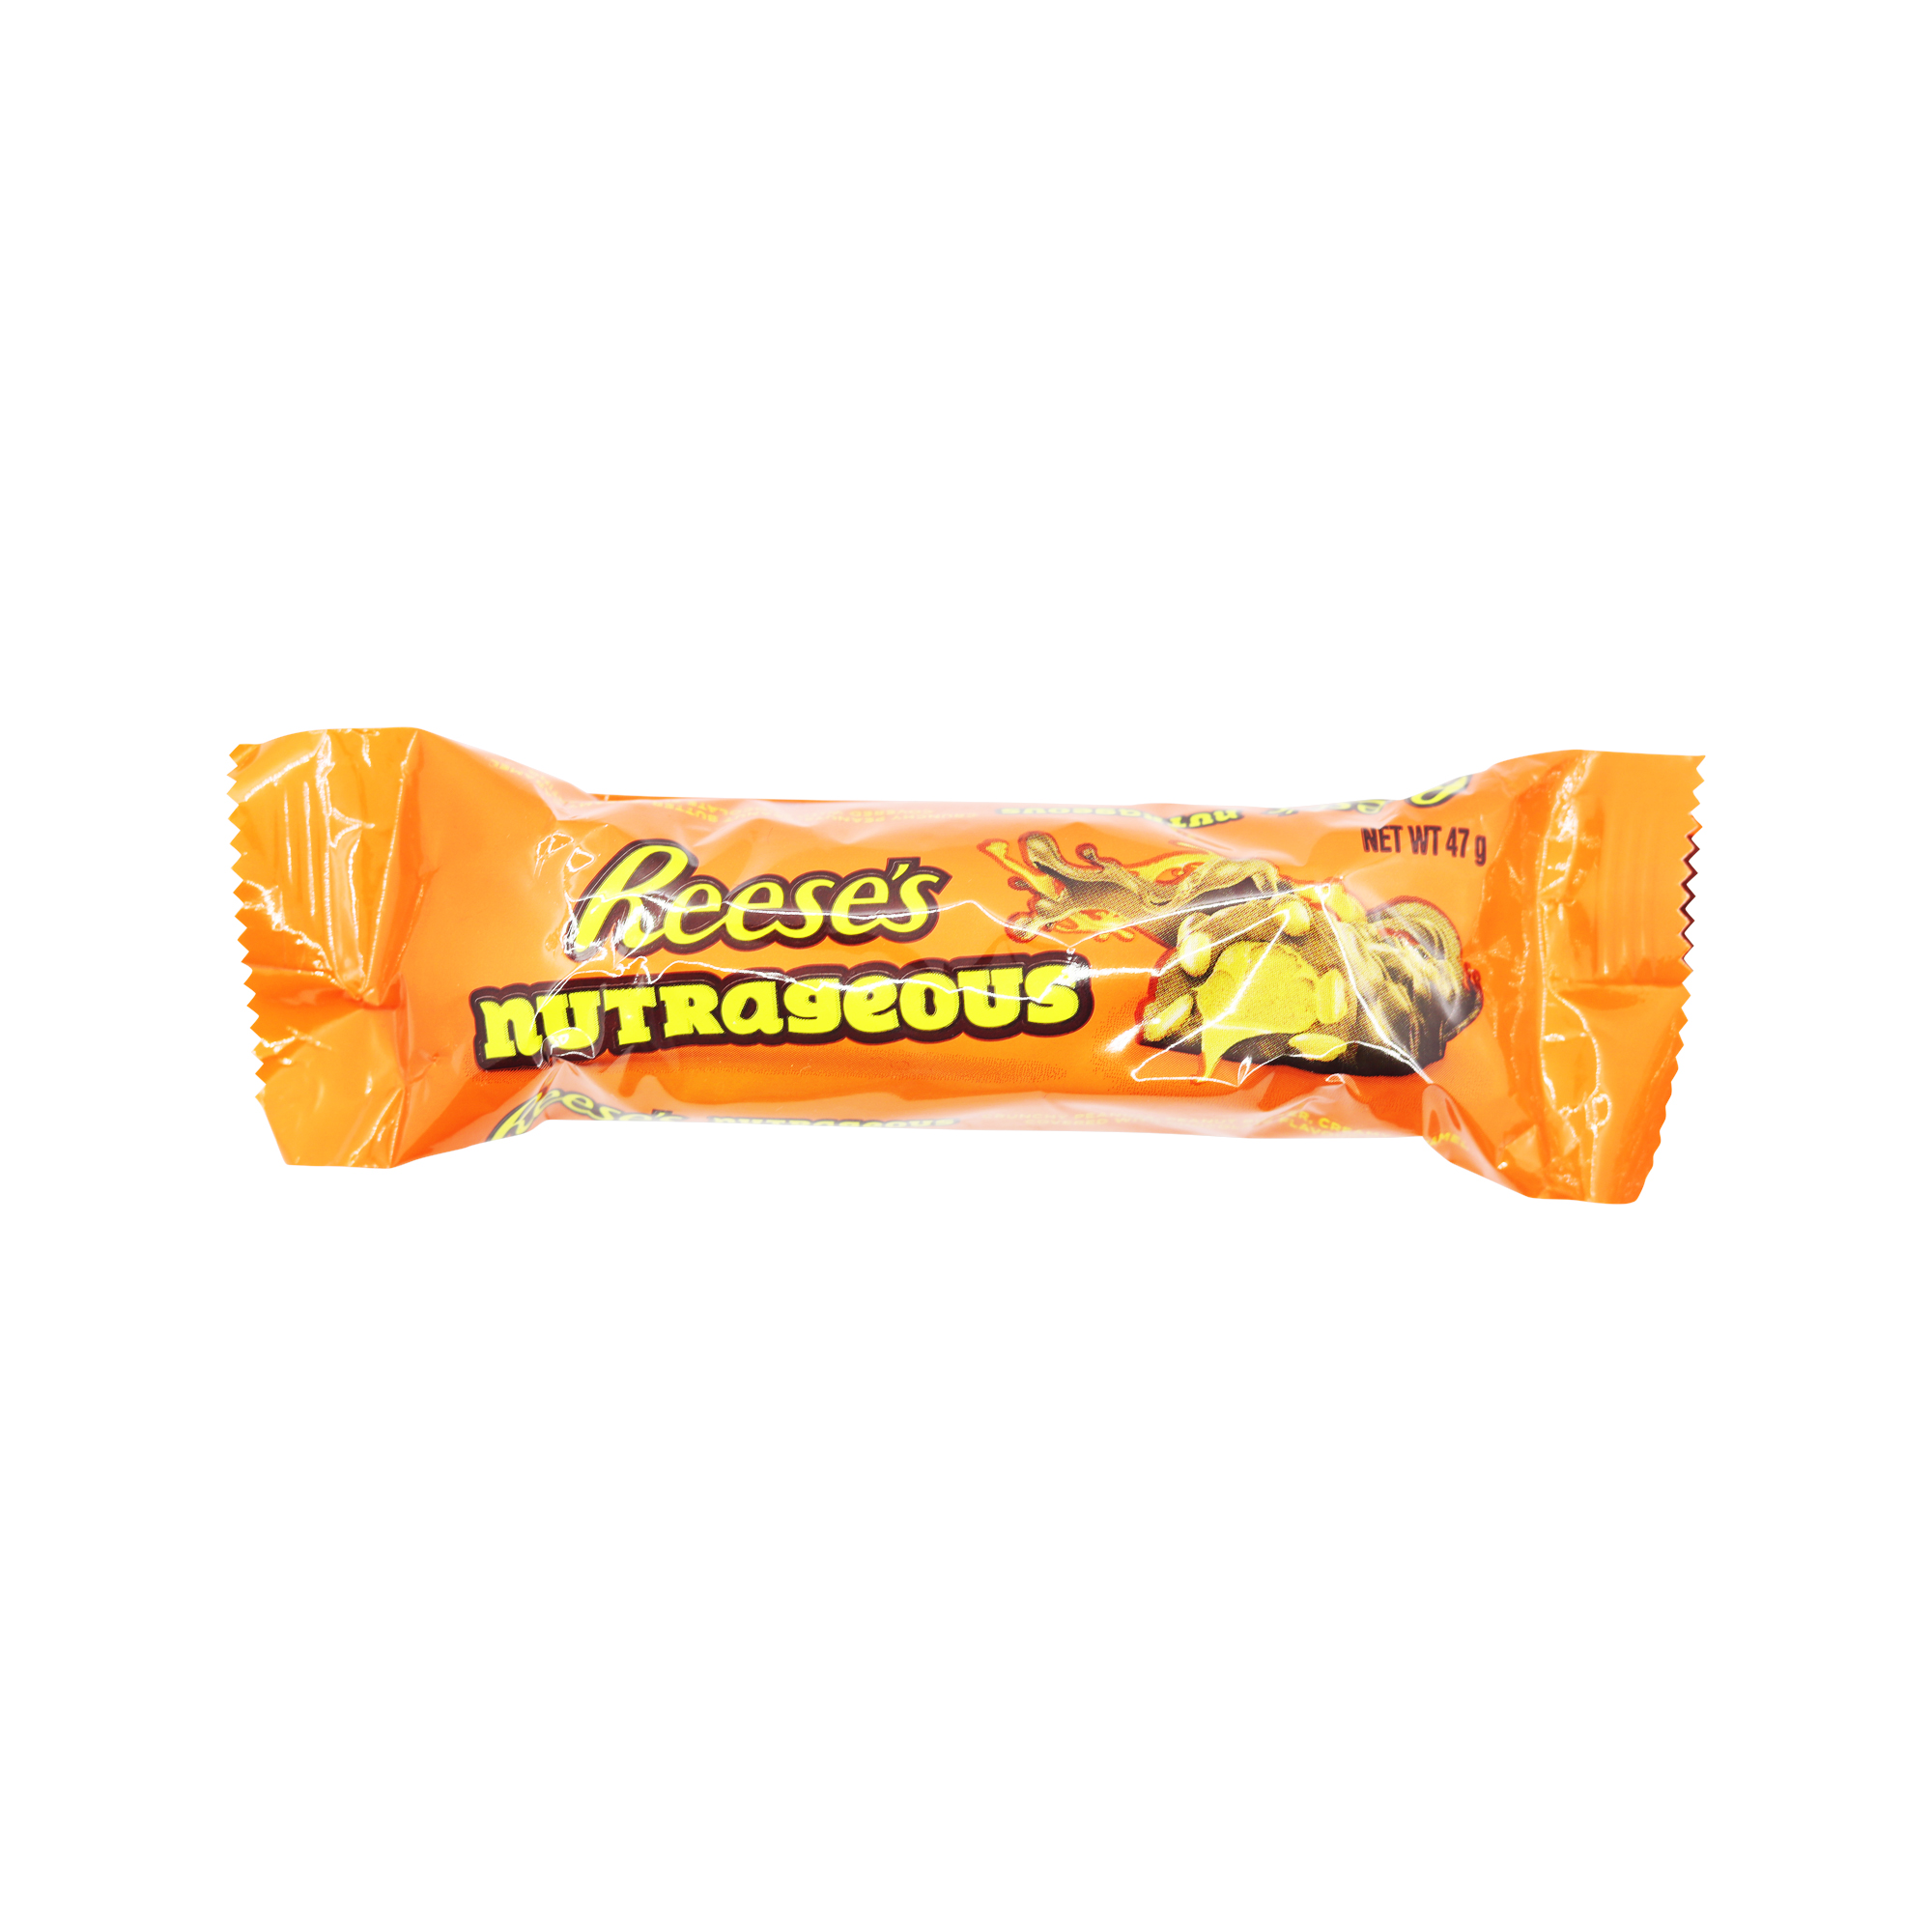 Reese's Nuts & Chocolate Bar (47g)